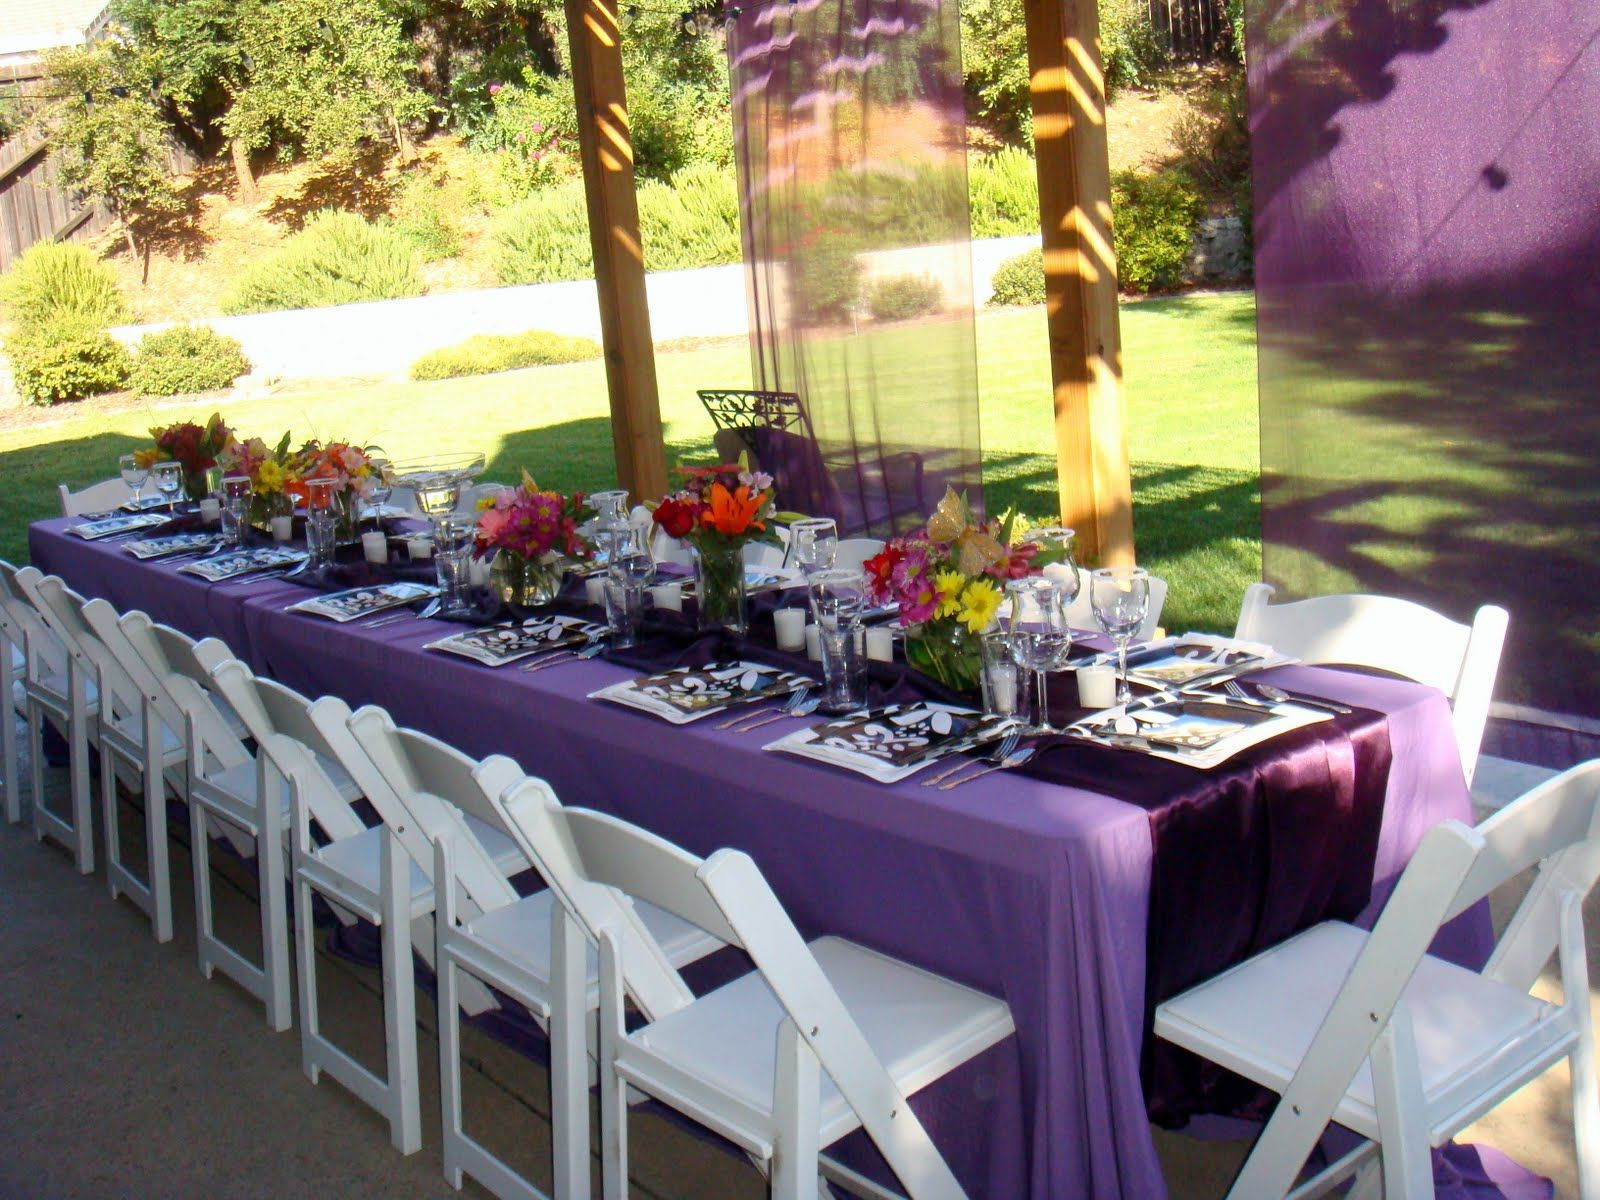 Backyard Graduation Party Ideas
 tablescapes for outdoor graduation party